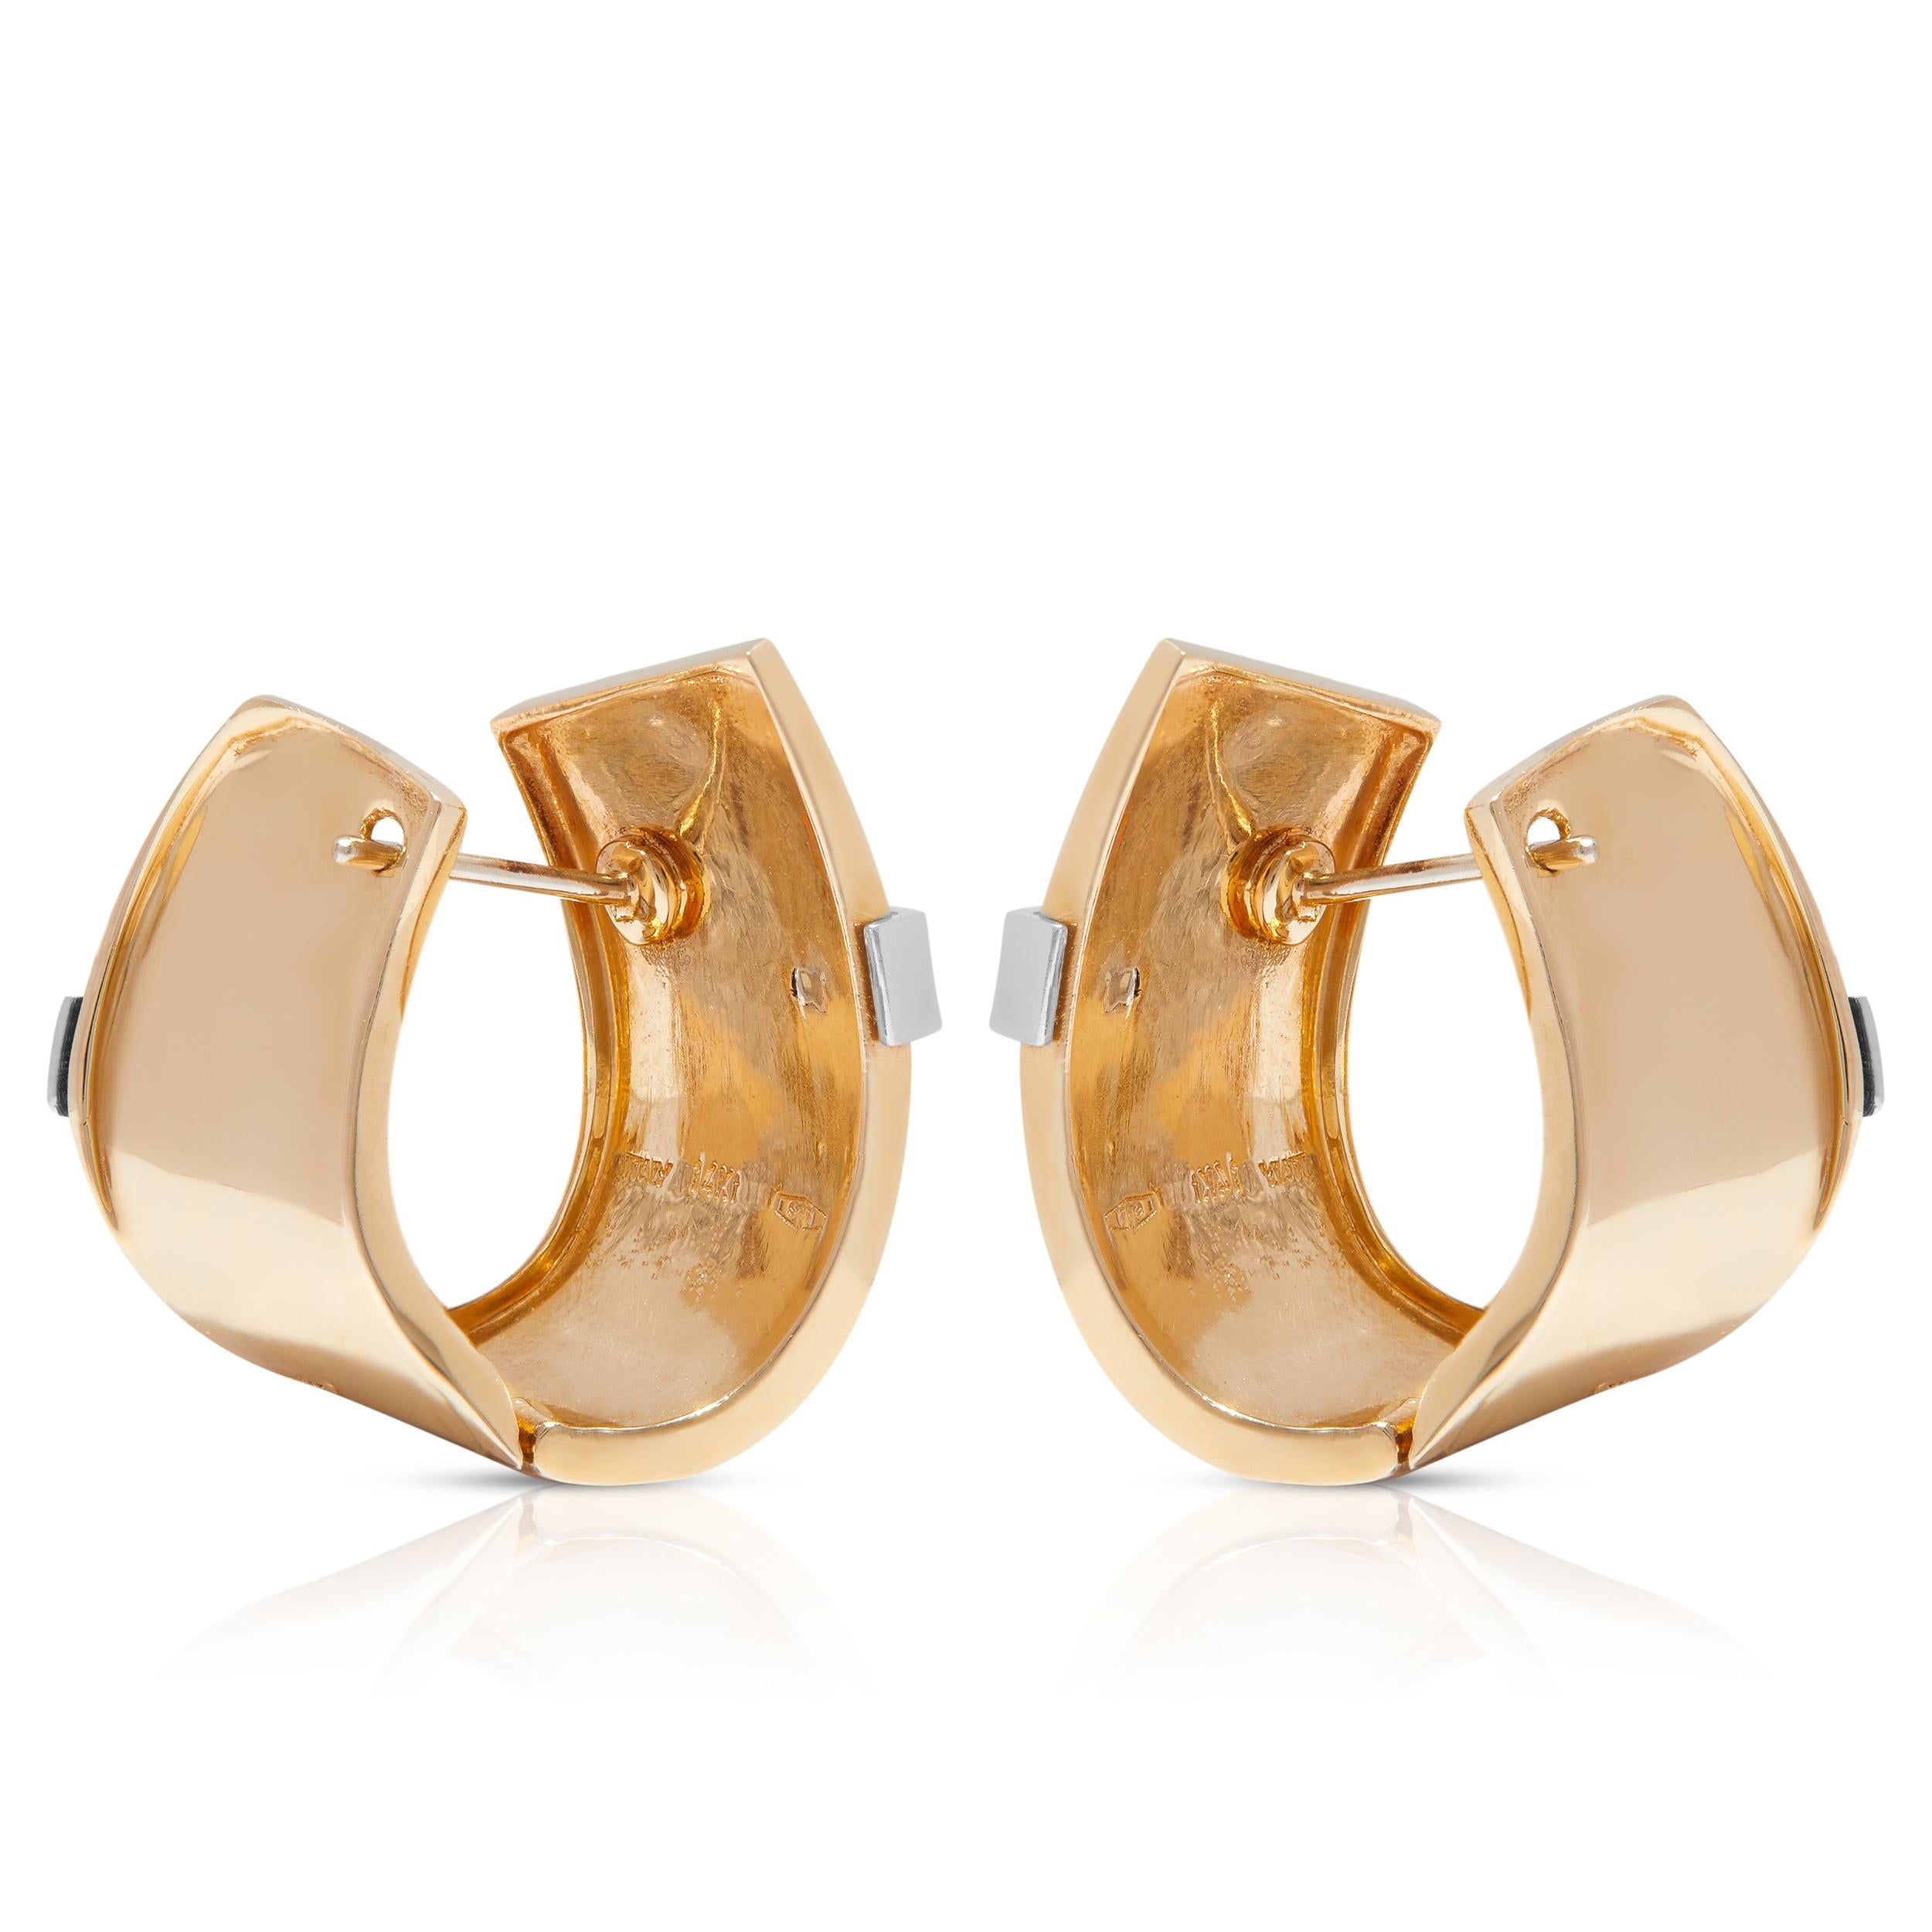 Italian Hinged Retro Earrings Stylized In 14ct Gold And Diamonds In Good Condition For Sale In Dubai, DU